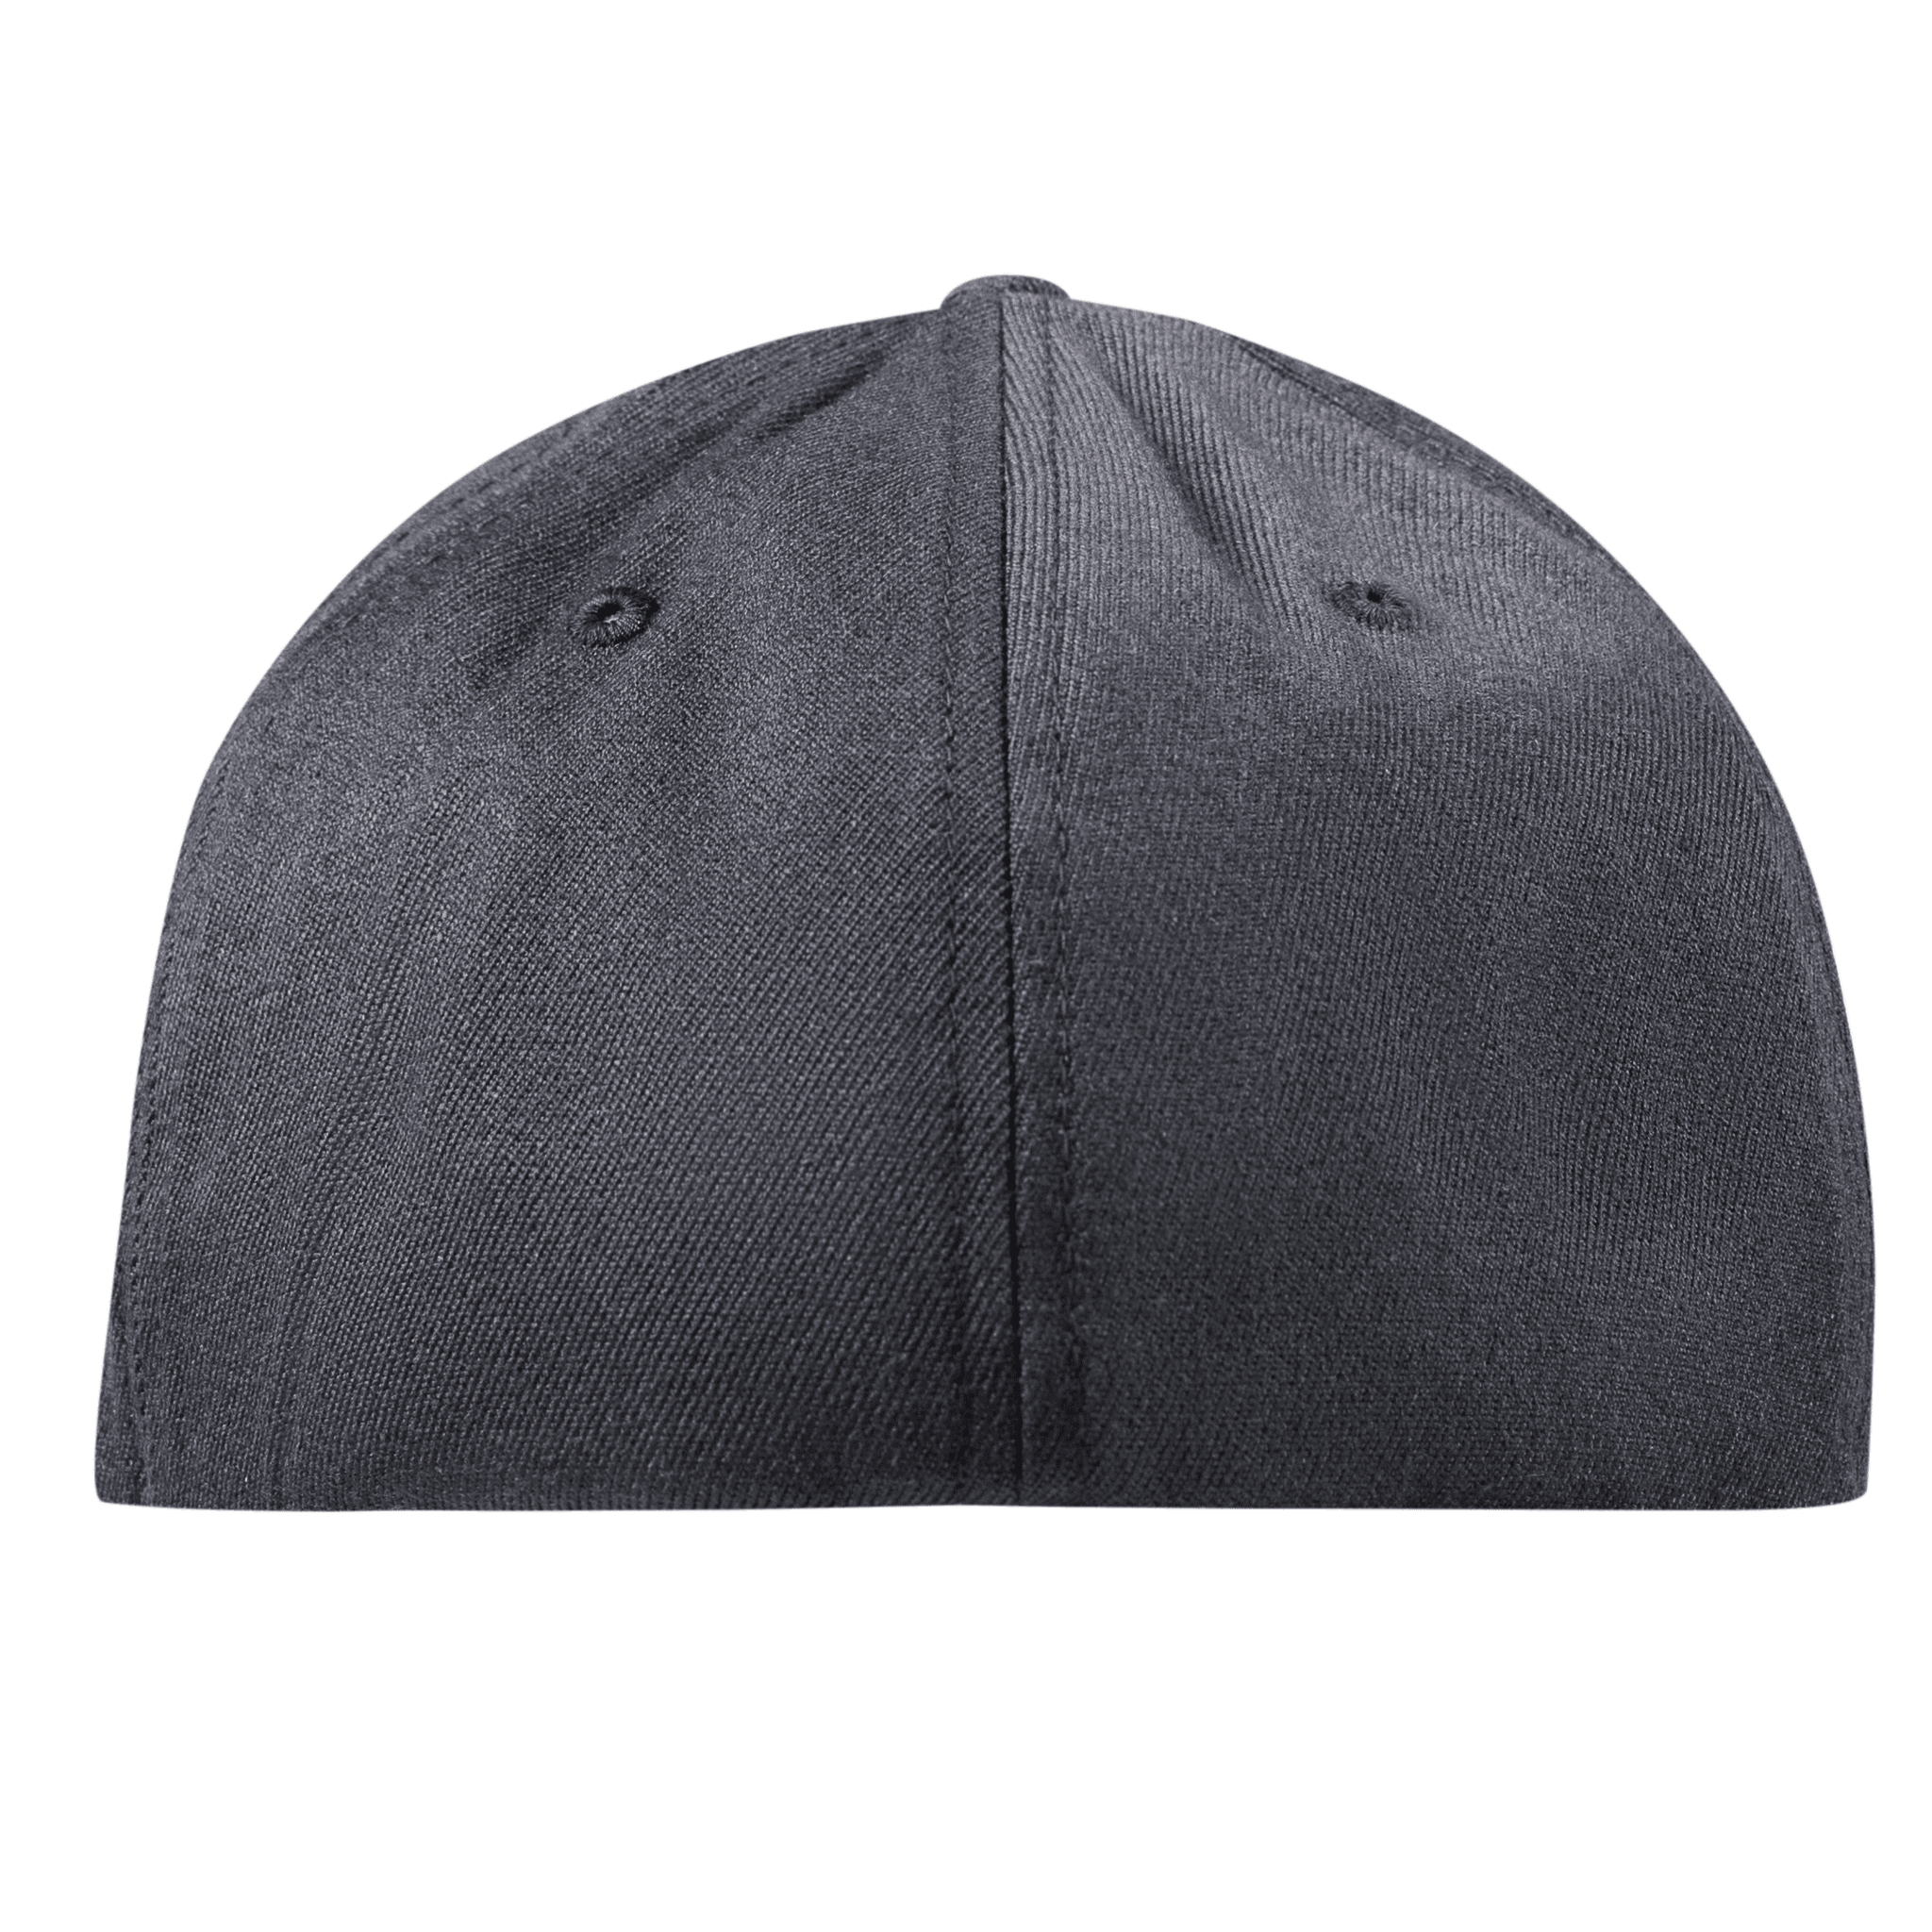 Wyoming Patriot Flexfit Fitted Back Charcoal